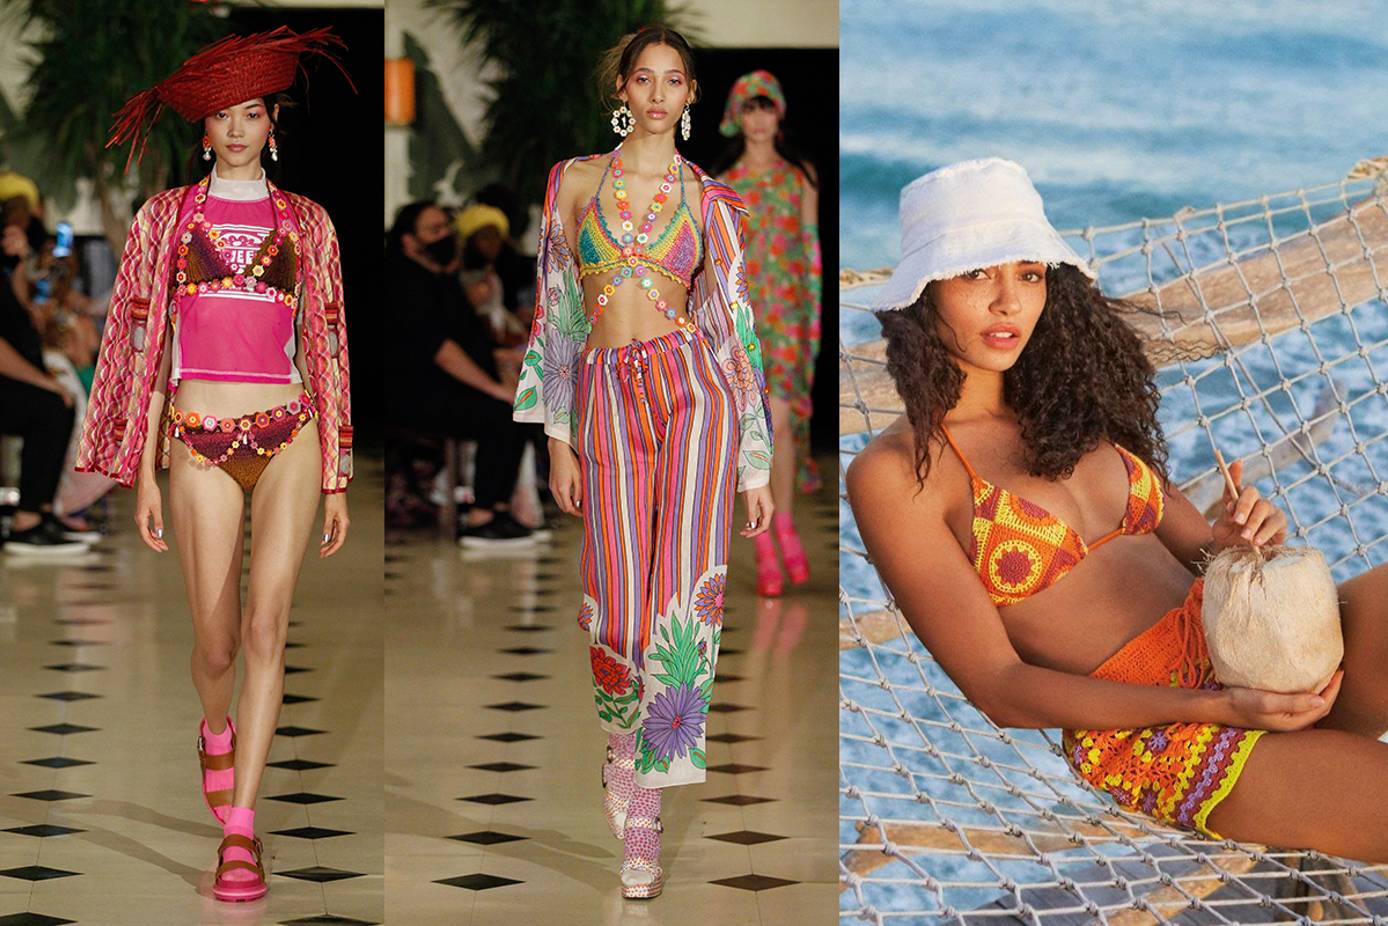 Louis Vuitton Spring 2000 Ready-to-Wear Collection